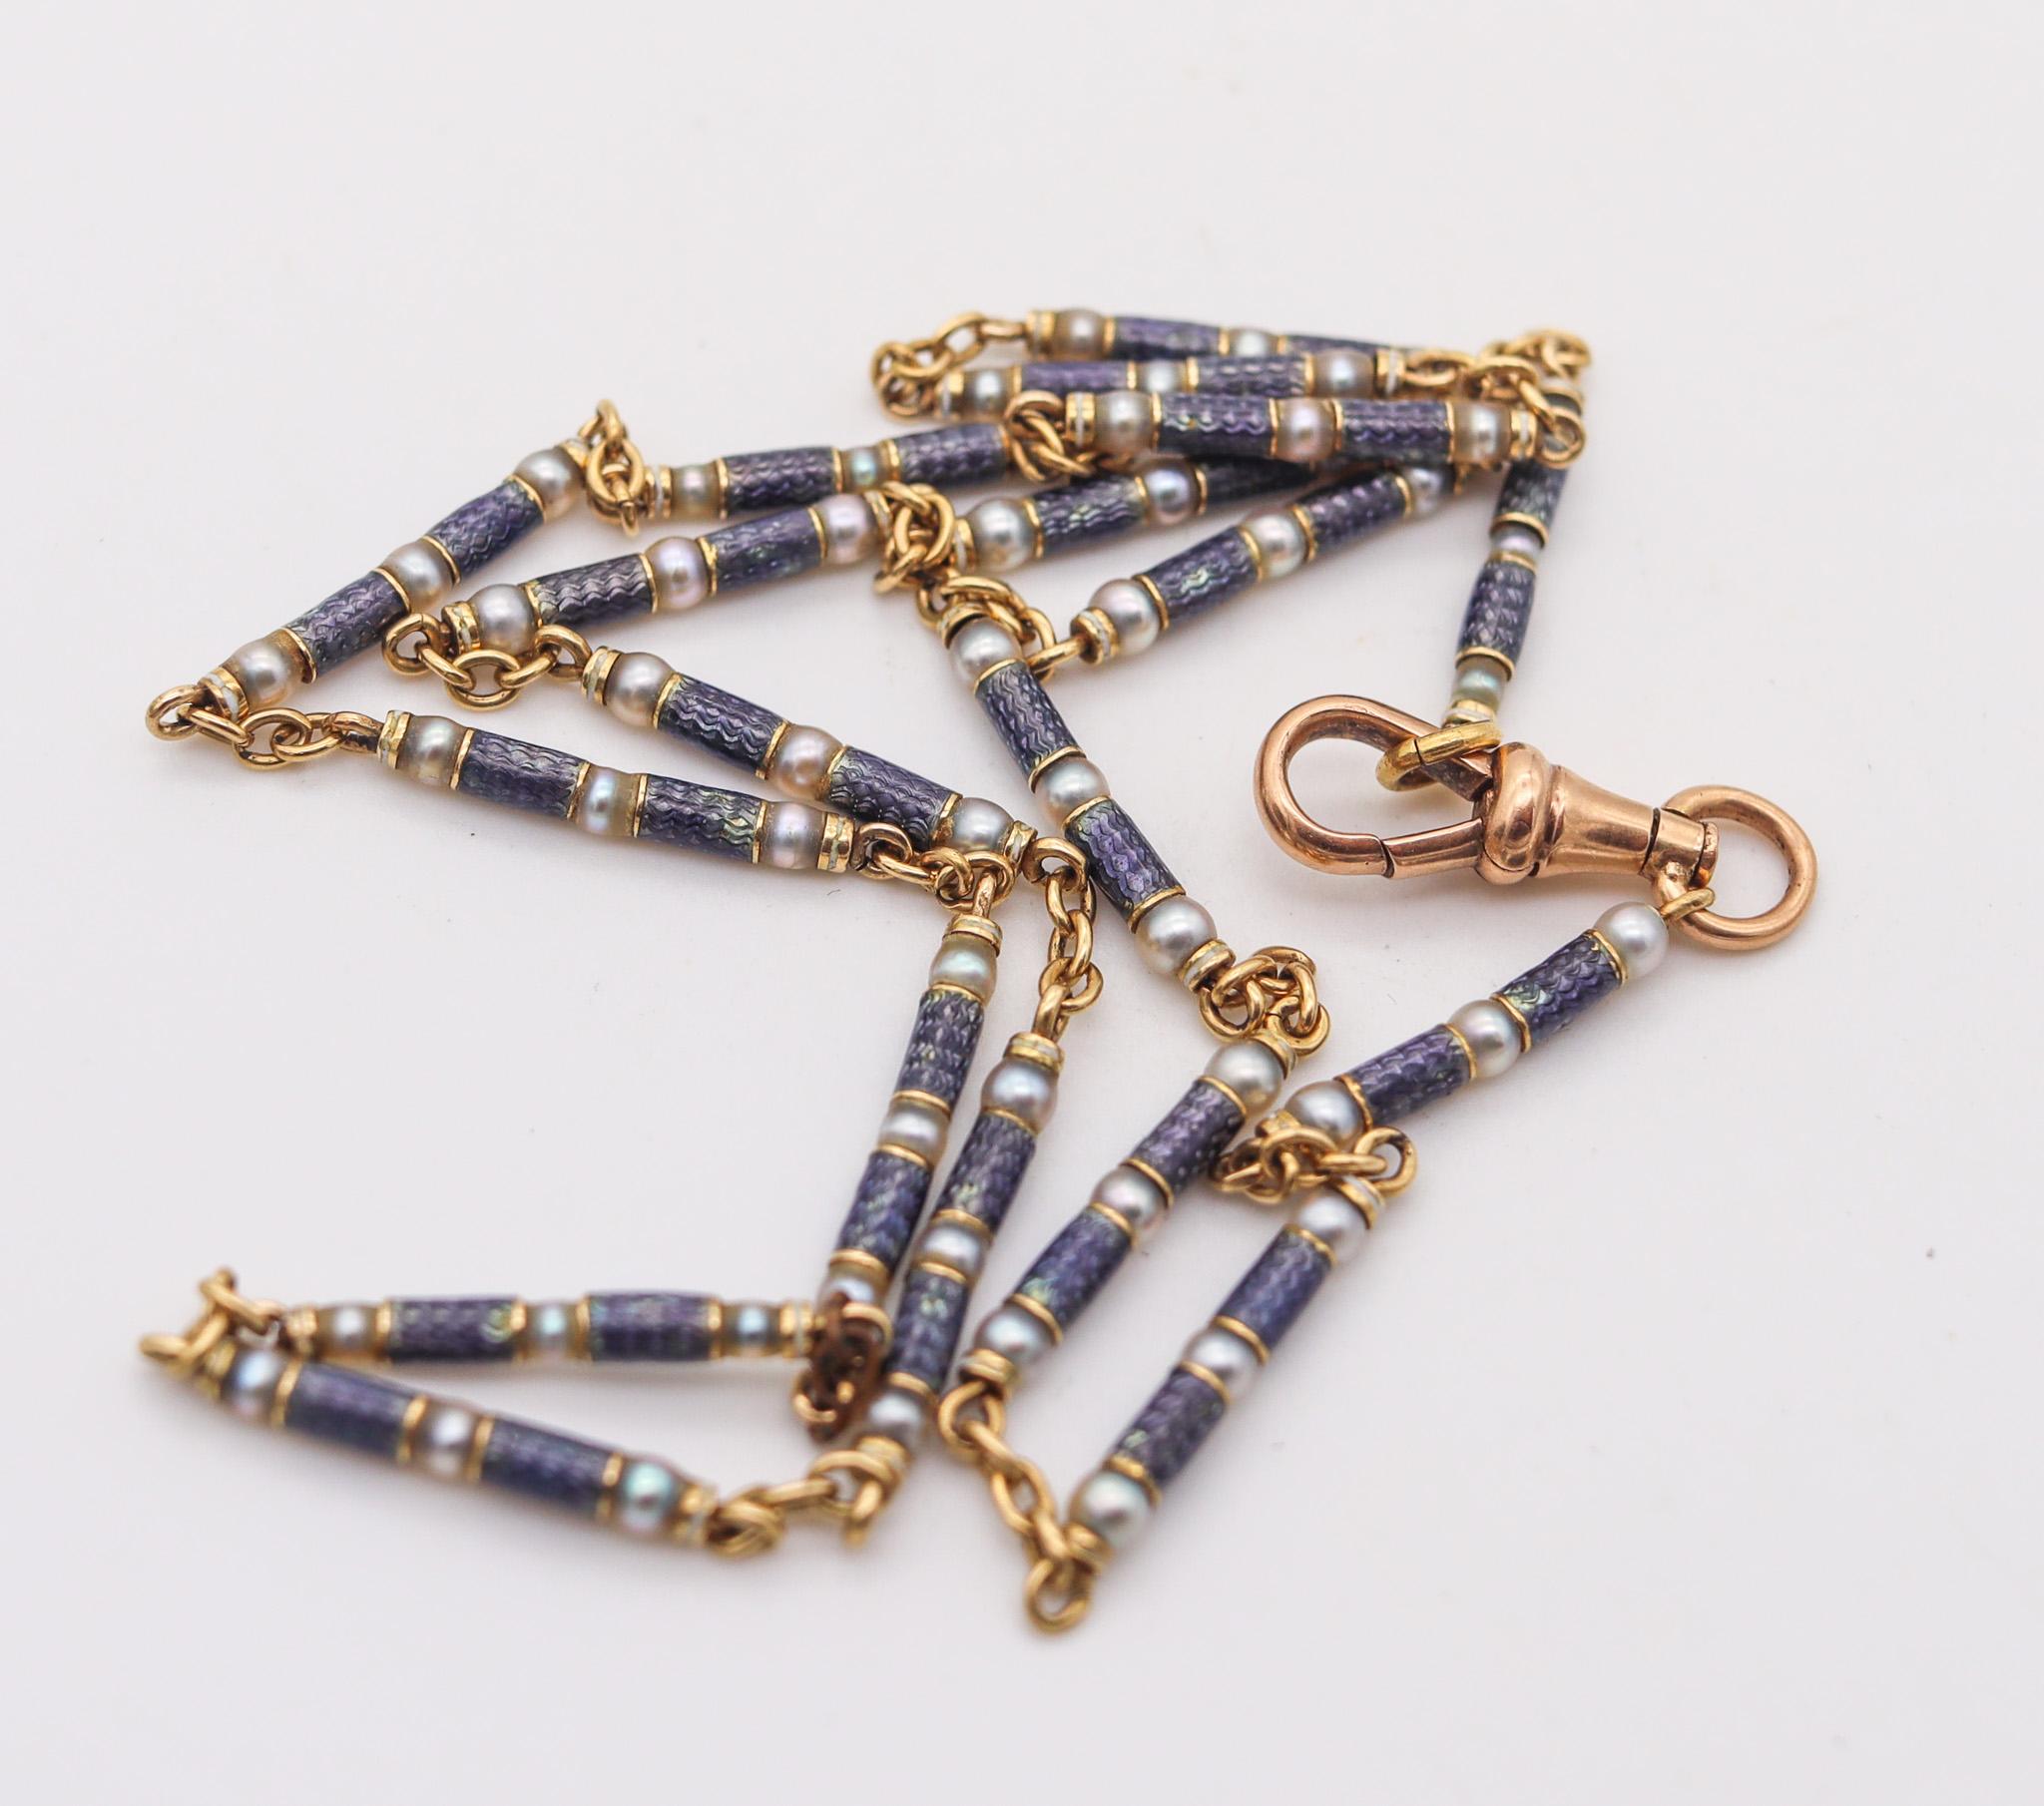 French Edwardian 1905 Chain In 18Kt Gold With Guilloche Blue Enamel and Pearls In Excellent Condition For Sale In Miami, FL